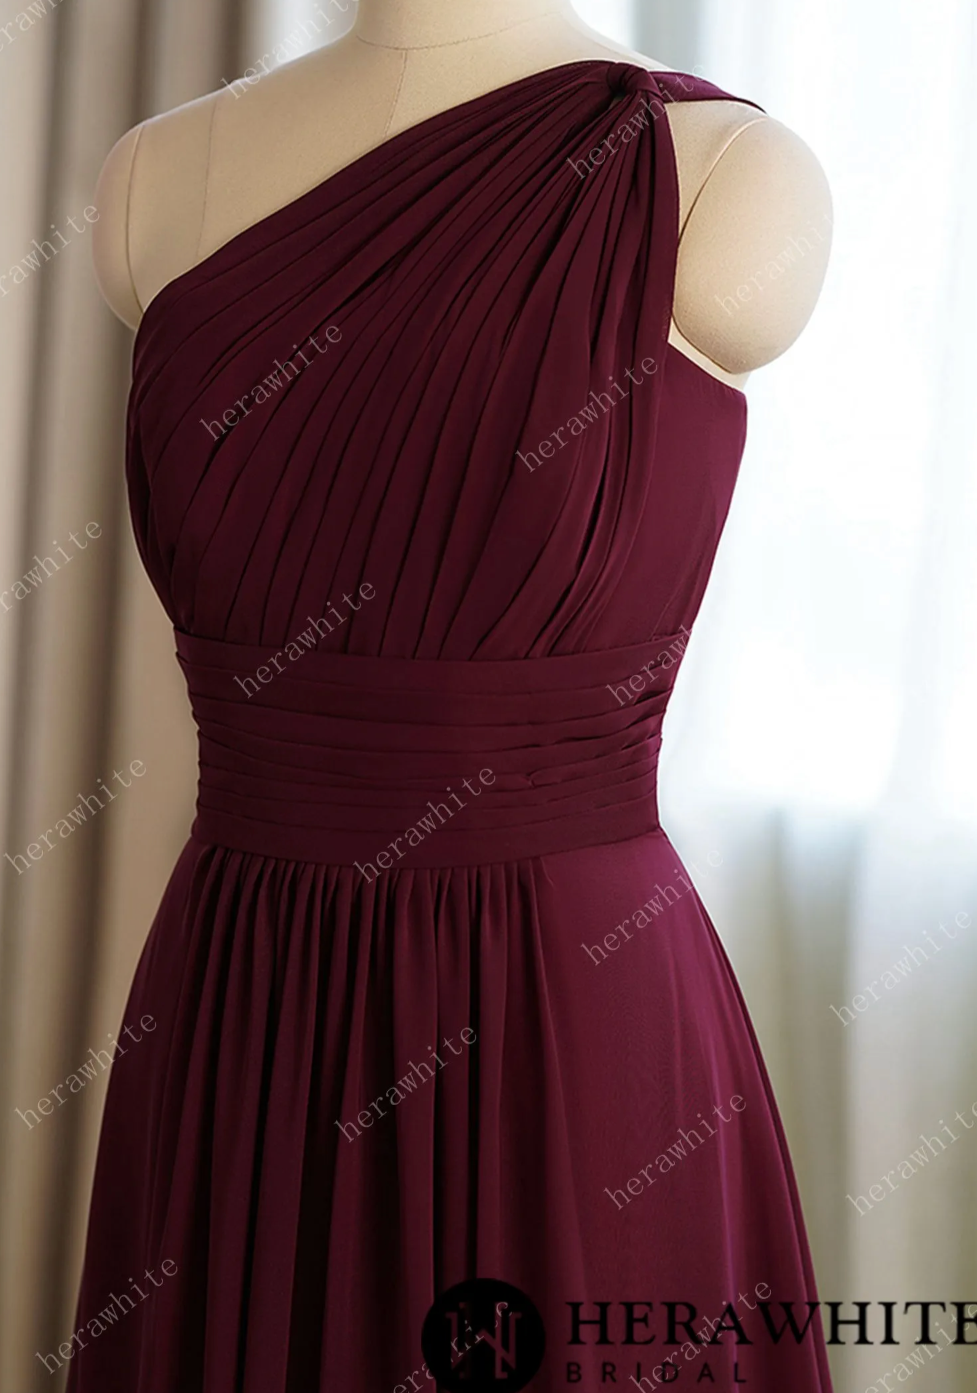 Load image into Gallery viewer, A-line Burgundy Chiffon One Shoulder Bridesmaid Dress
